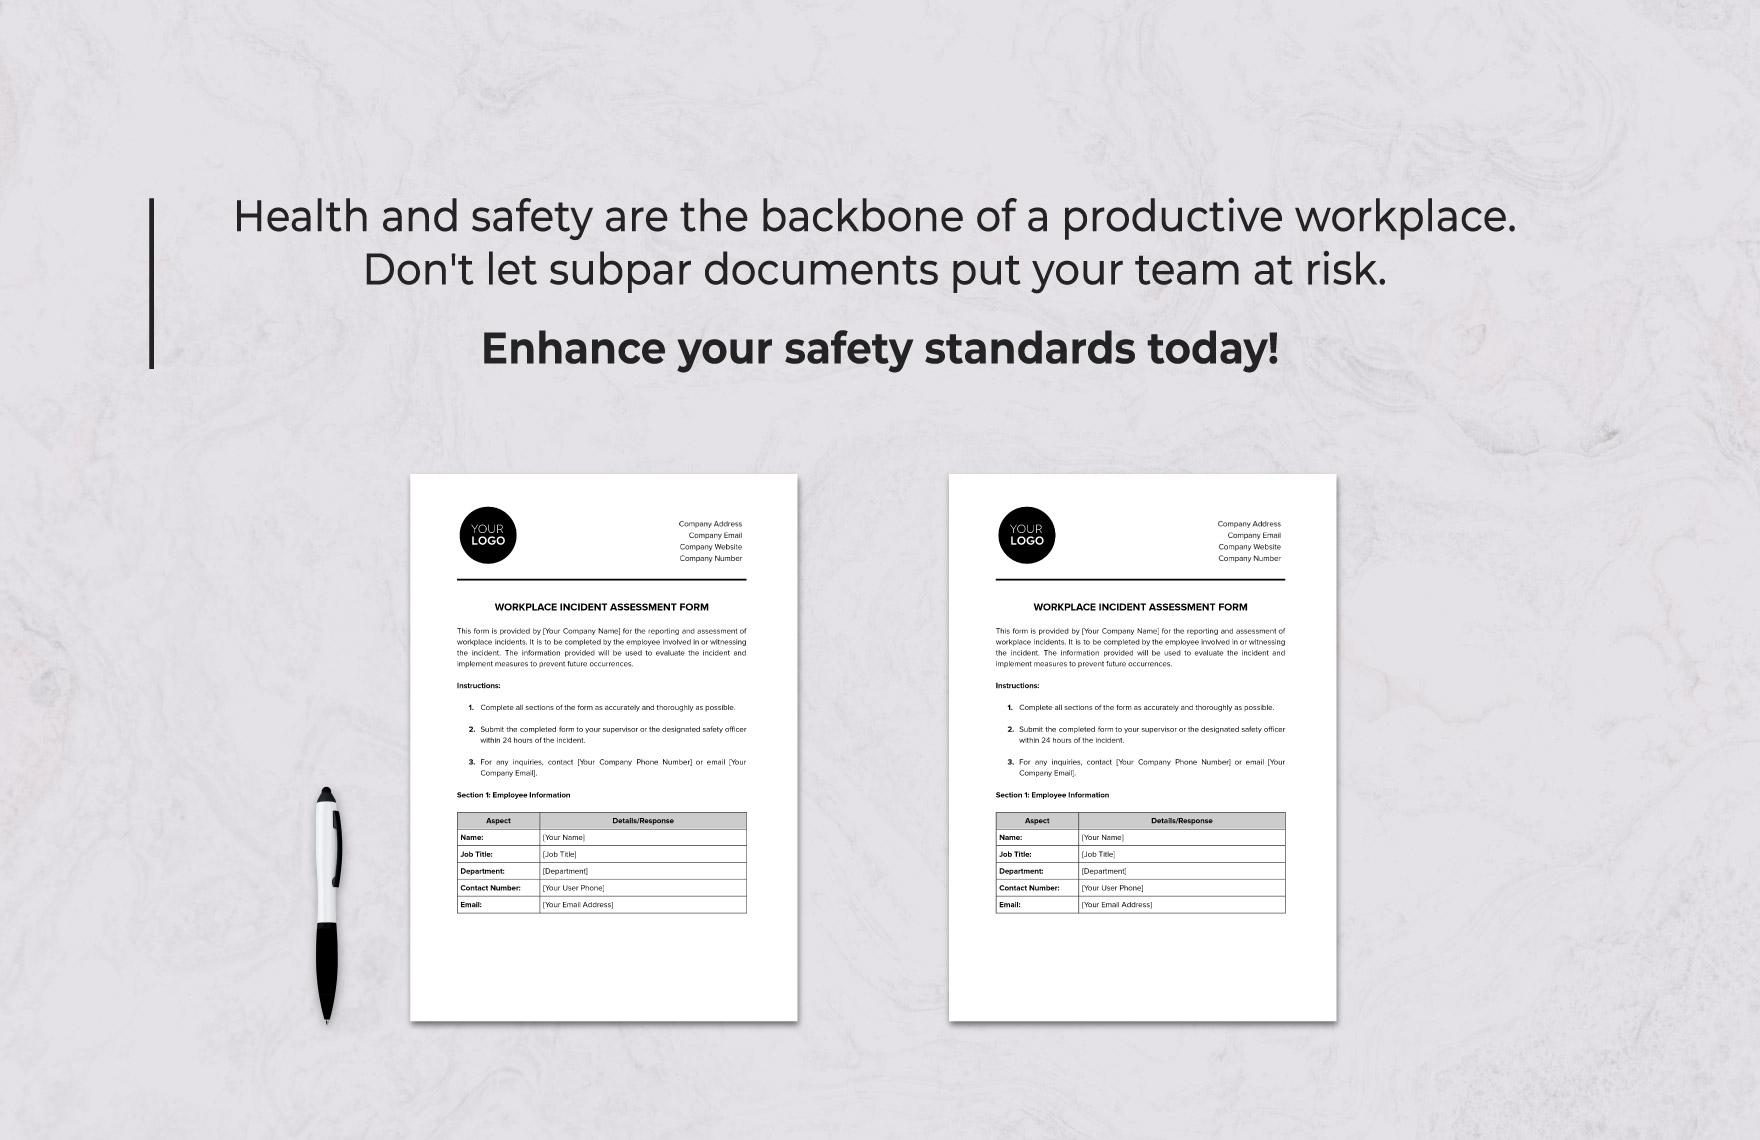 Workplace Incident Assessment Form Template